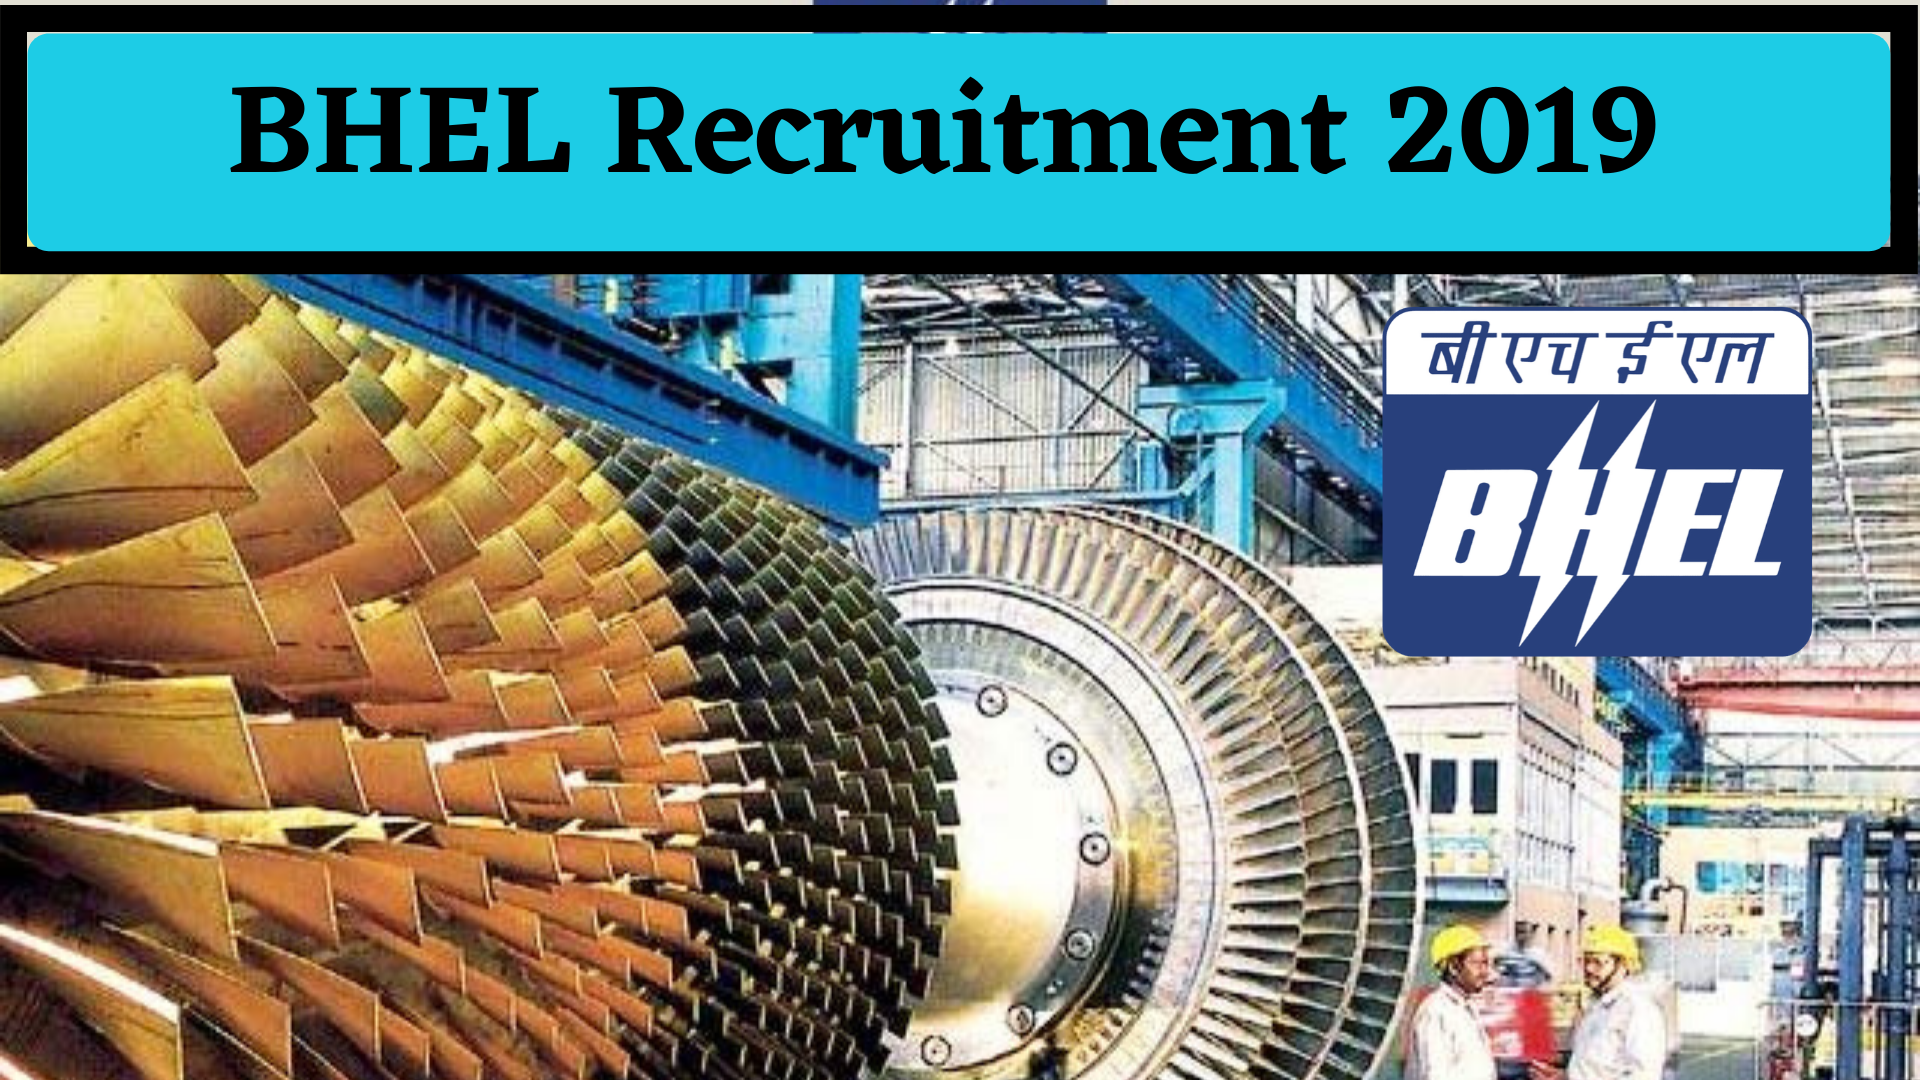 BHEL Careers Portal ... RECRUITMENT- Experienced Engineering Professionals -2019 ... BHEL, one of India's leading PSUs, is today the largest engineering ... ‎RECRUITMENT- Engineer ... · ‎RECRUITMENT- Experienced ...